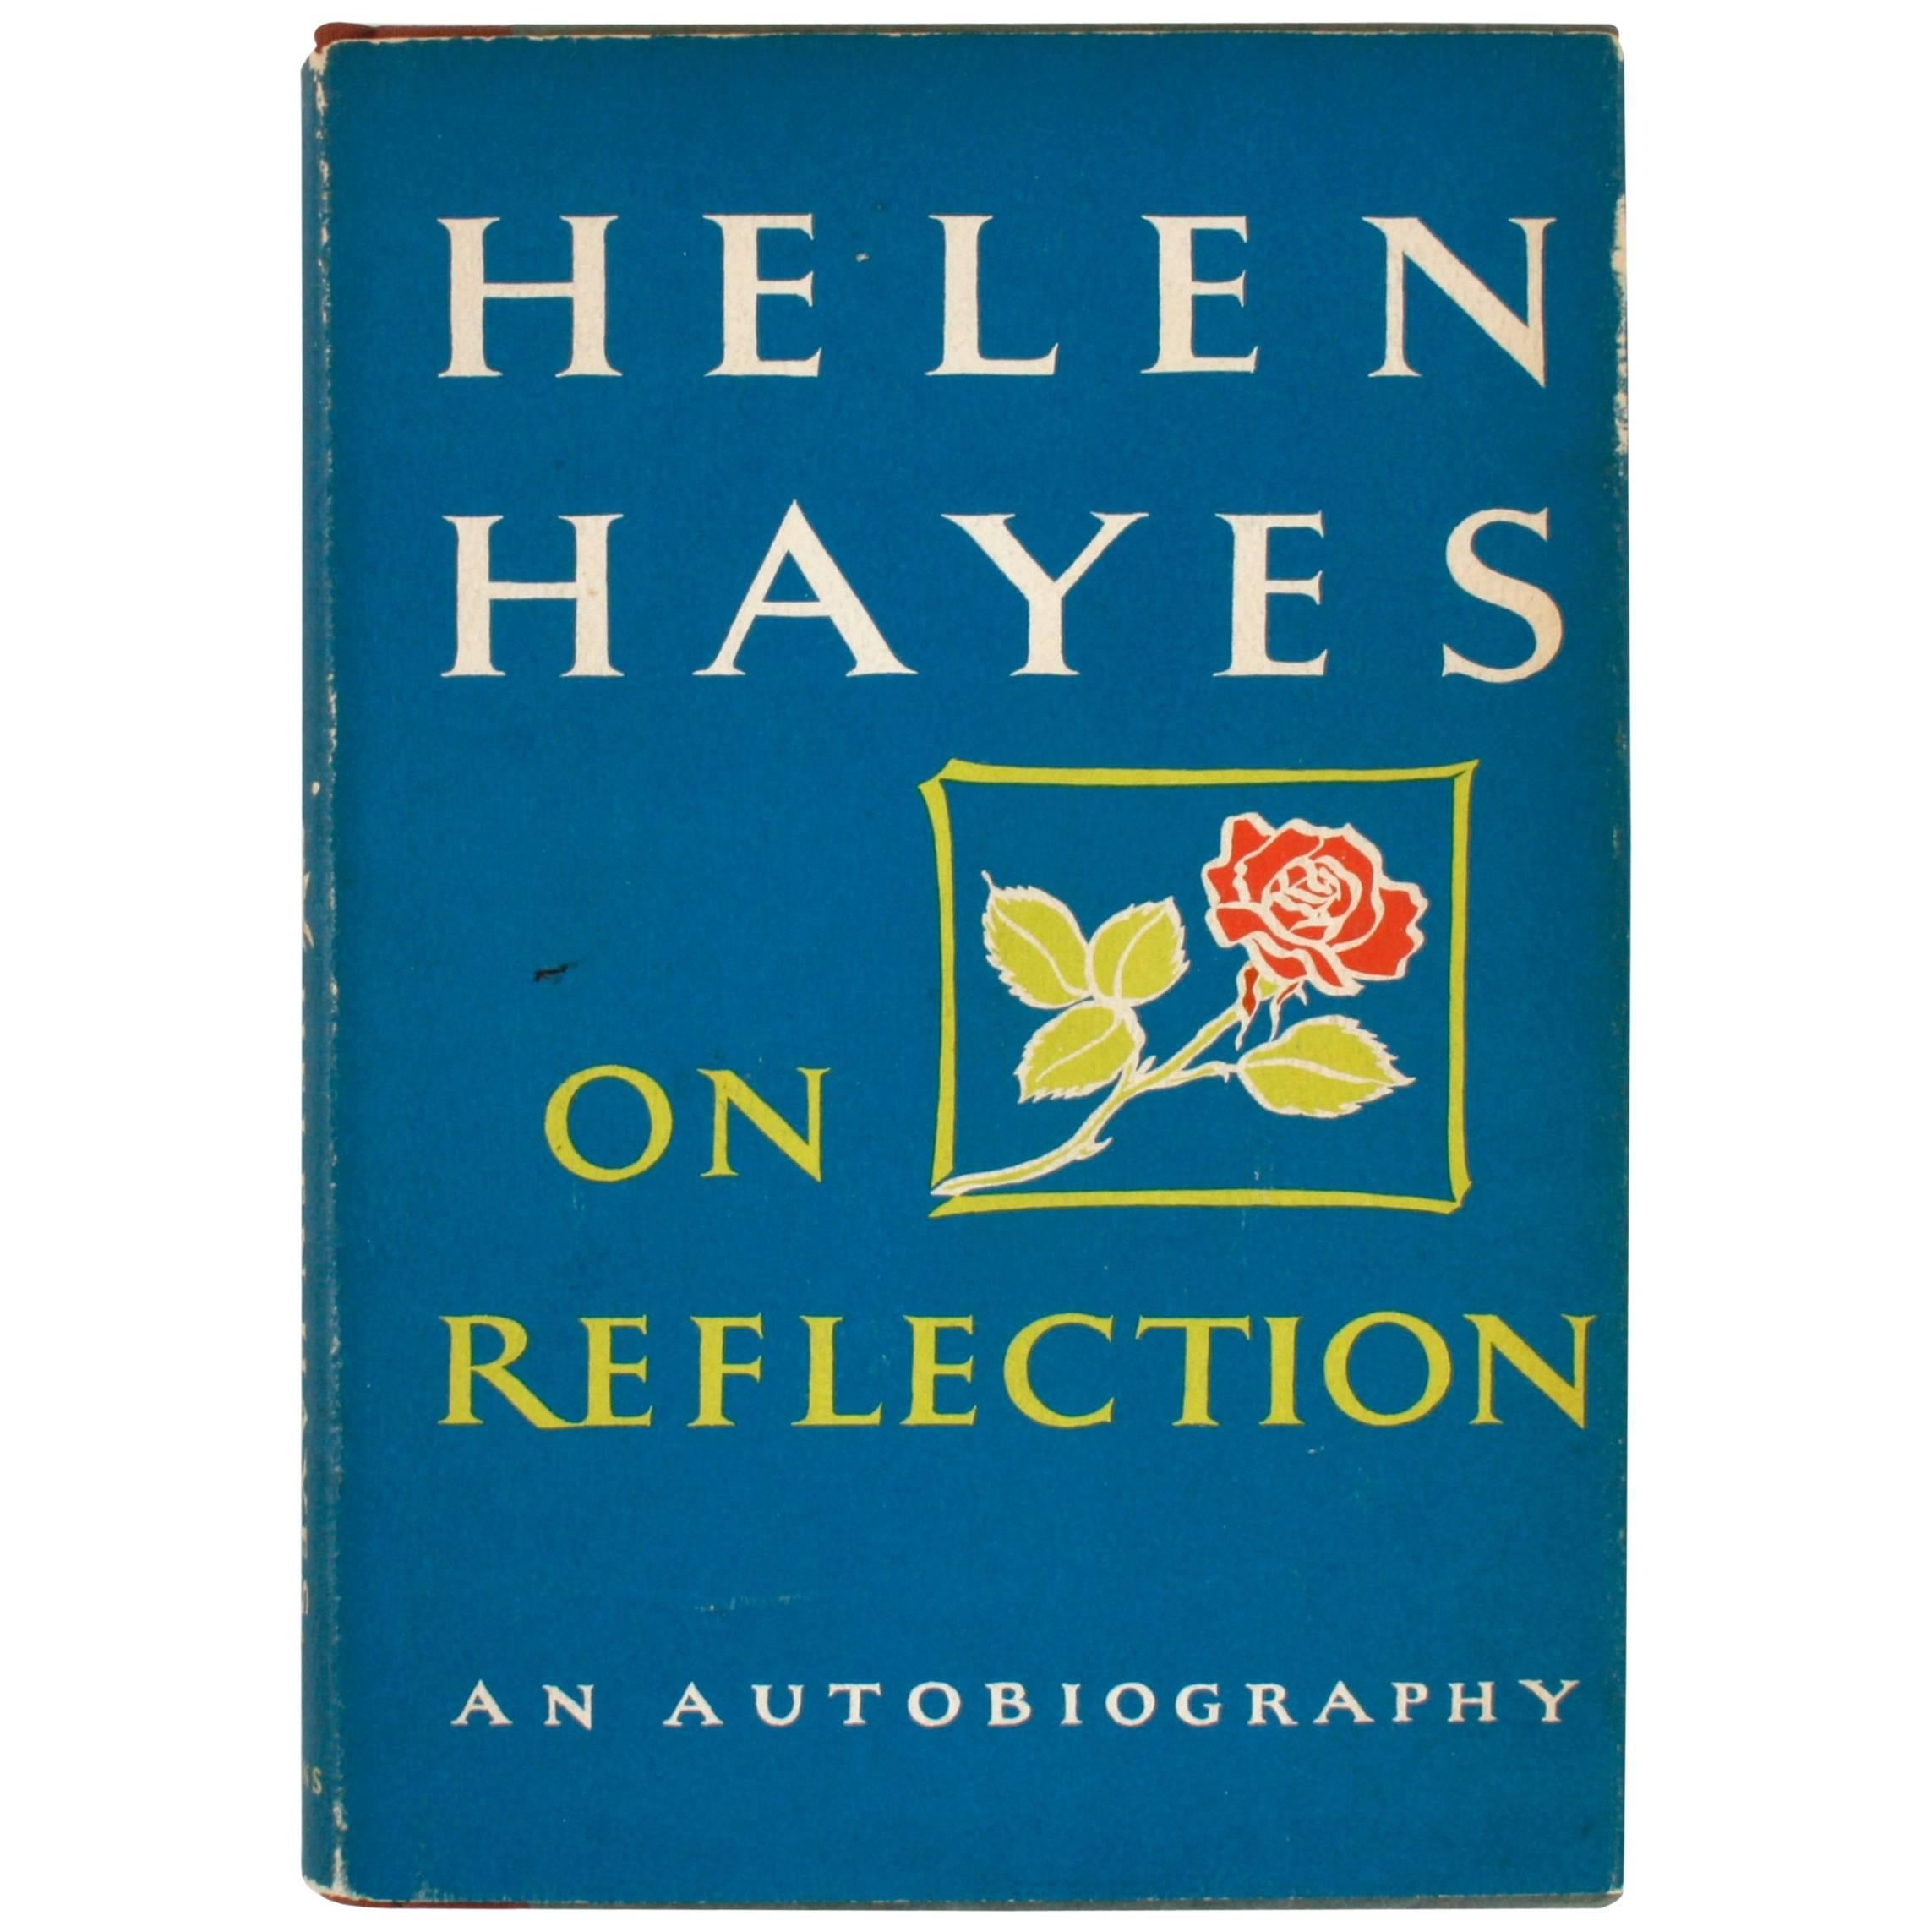 "Helen Hayes On Reflection An Autobiography", Signé  en vente